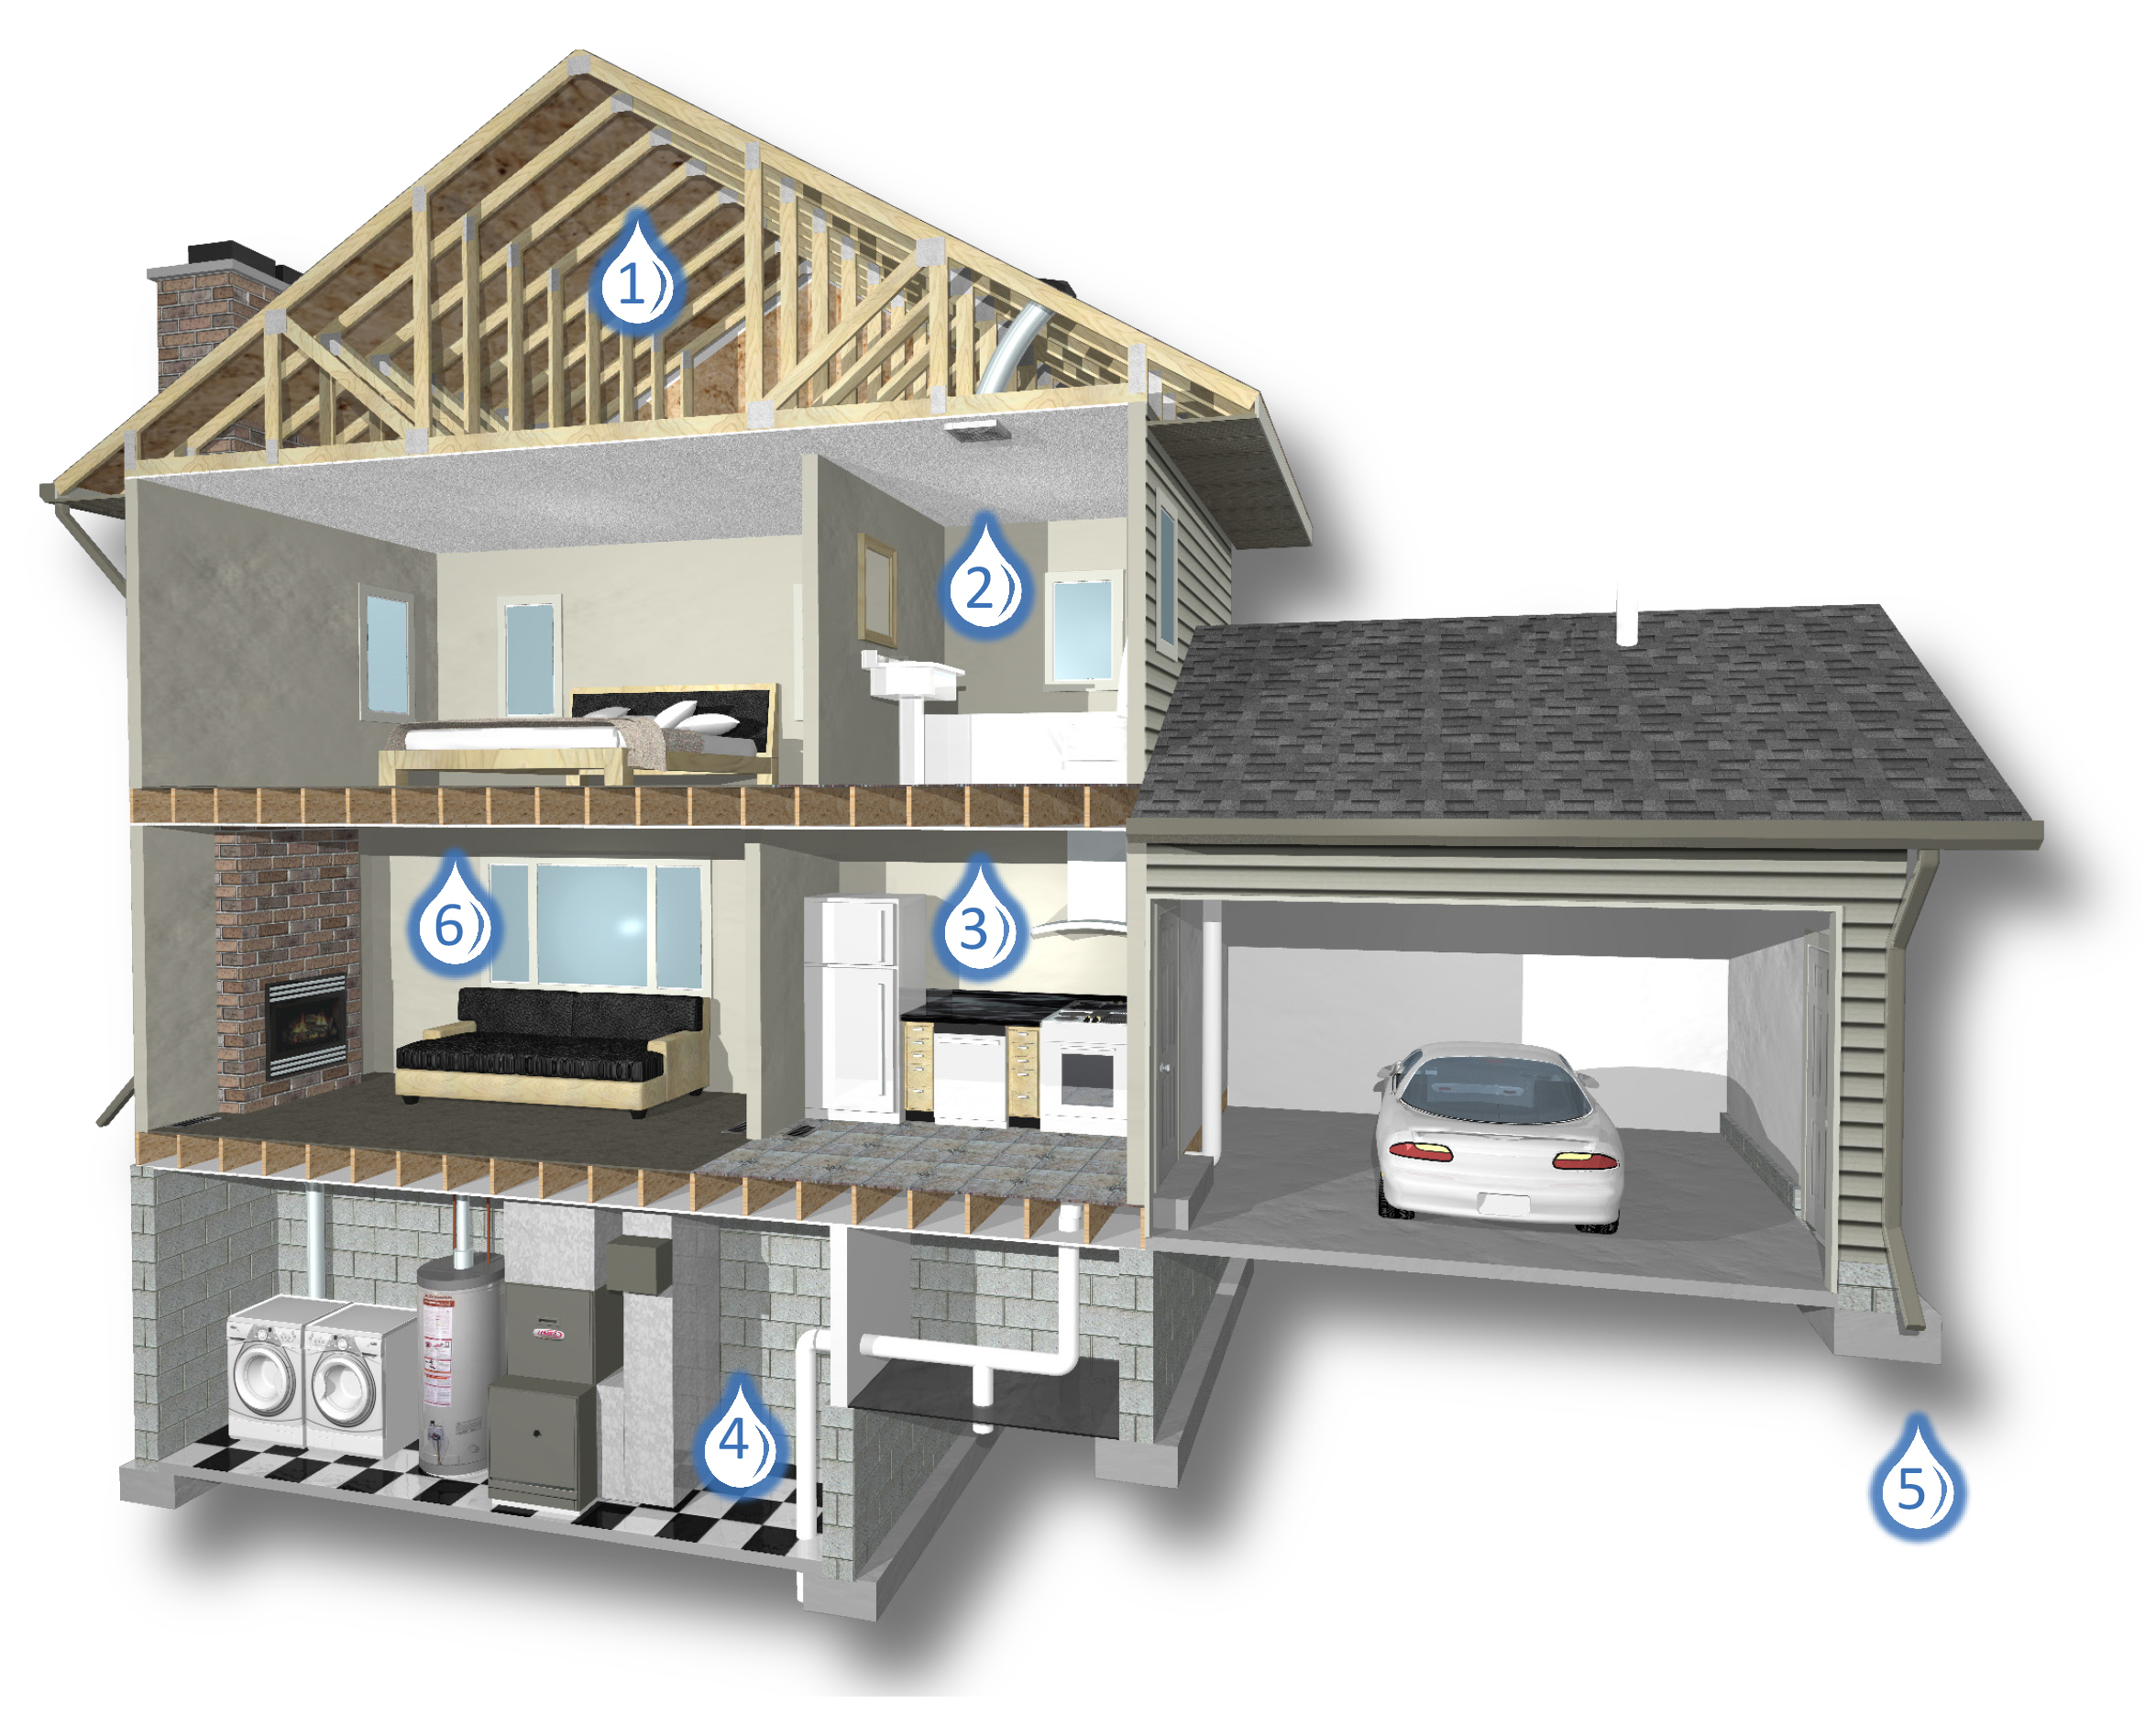 Mold and moisture house diagram